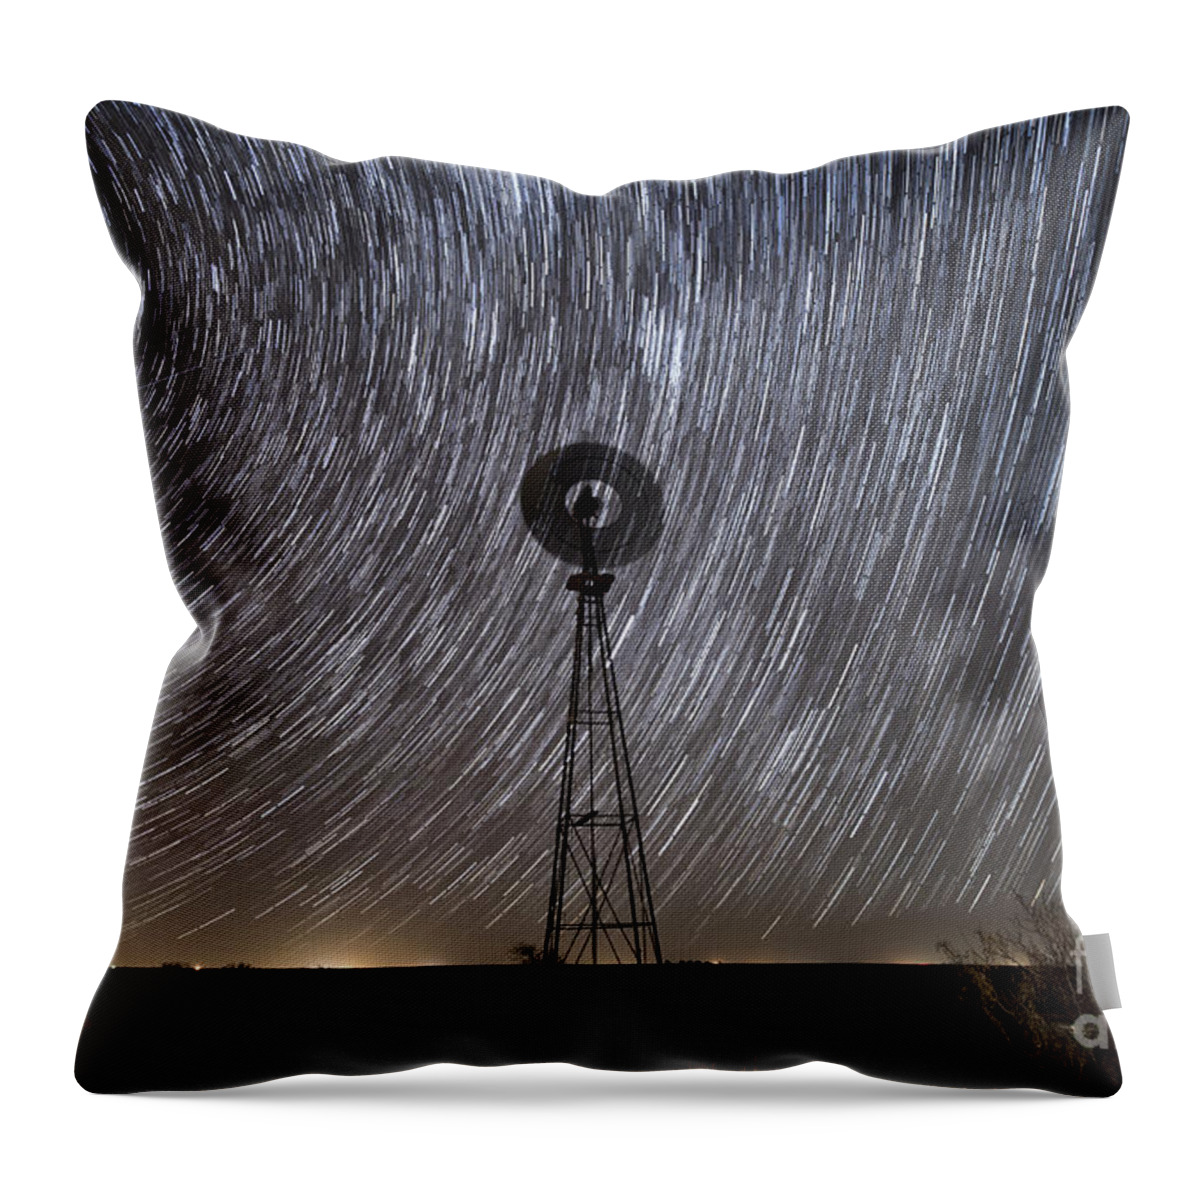 Windmill Throw Pillow featuring the photograph Life Stands Stilll In Rural West Texas by Melany Sarafis